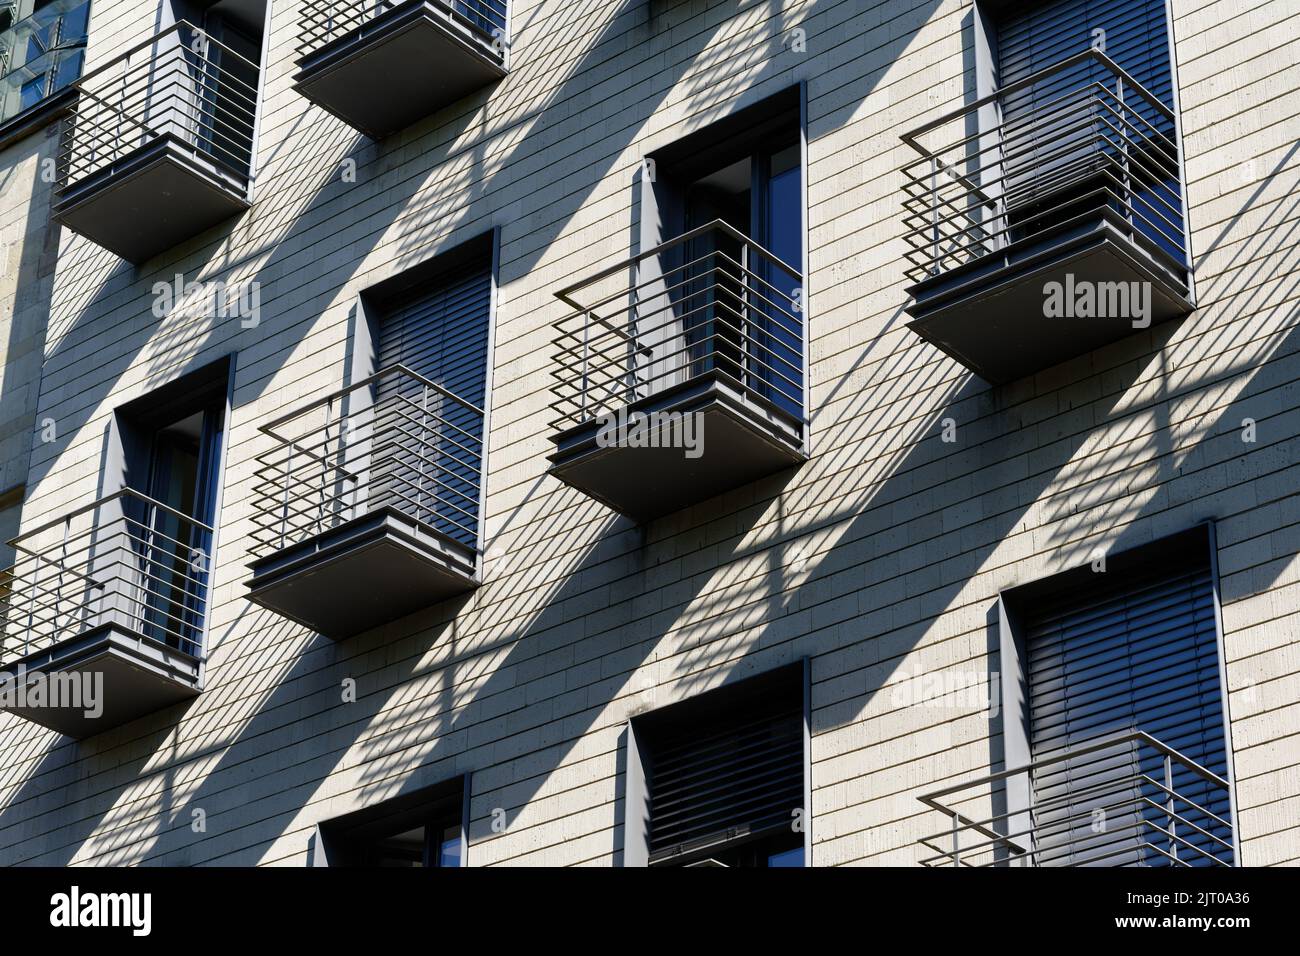 very small balconies on a residential home cast shadows Stock Photo